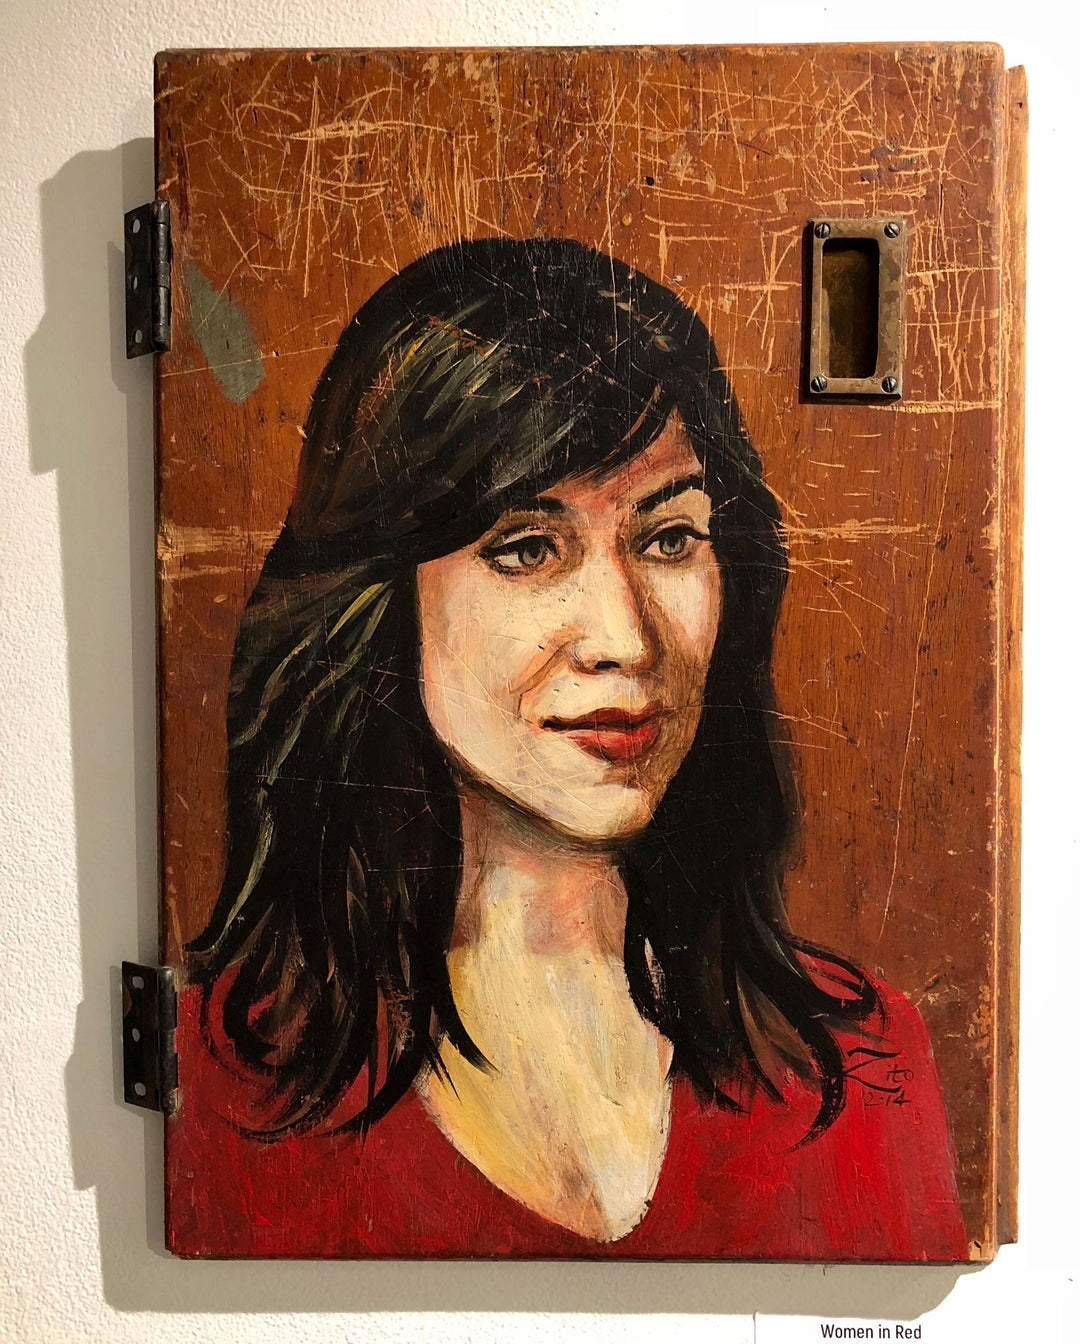 Woman in Red Acrylic Portrait